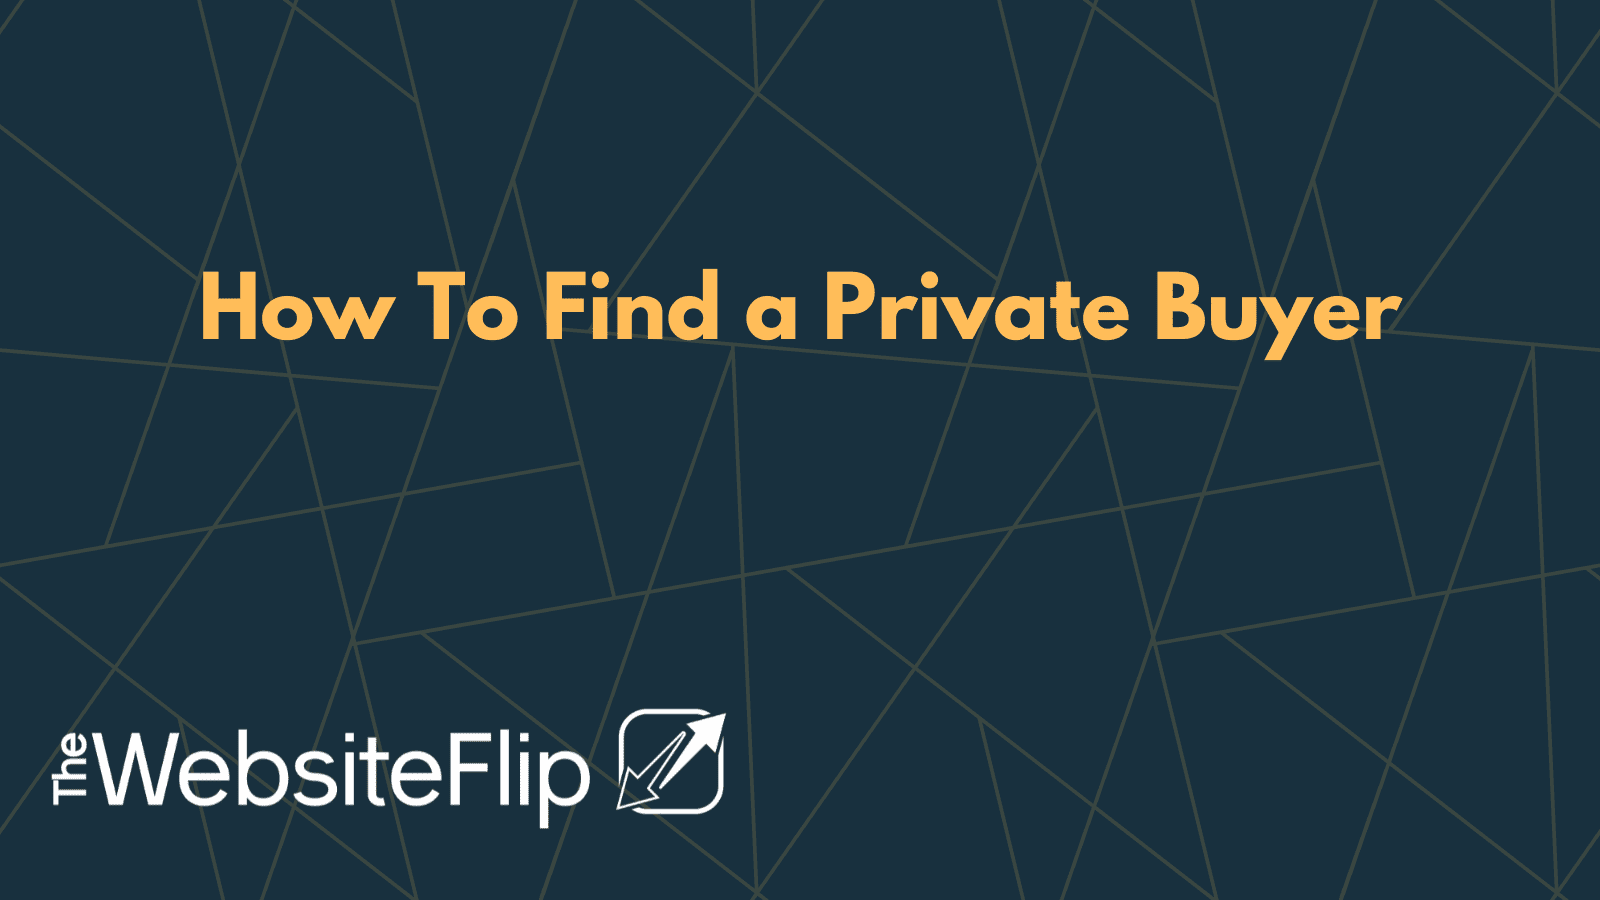 How To Find a Private Buyer